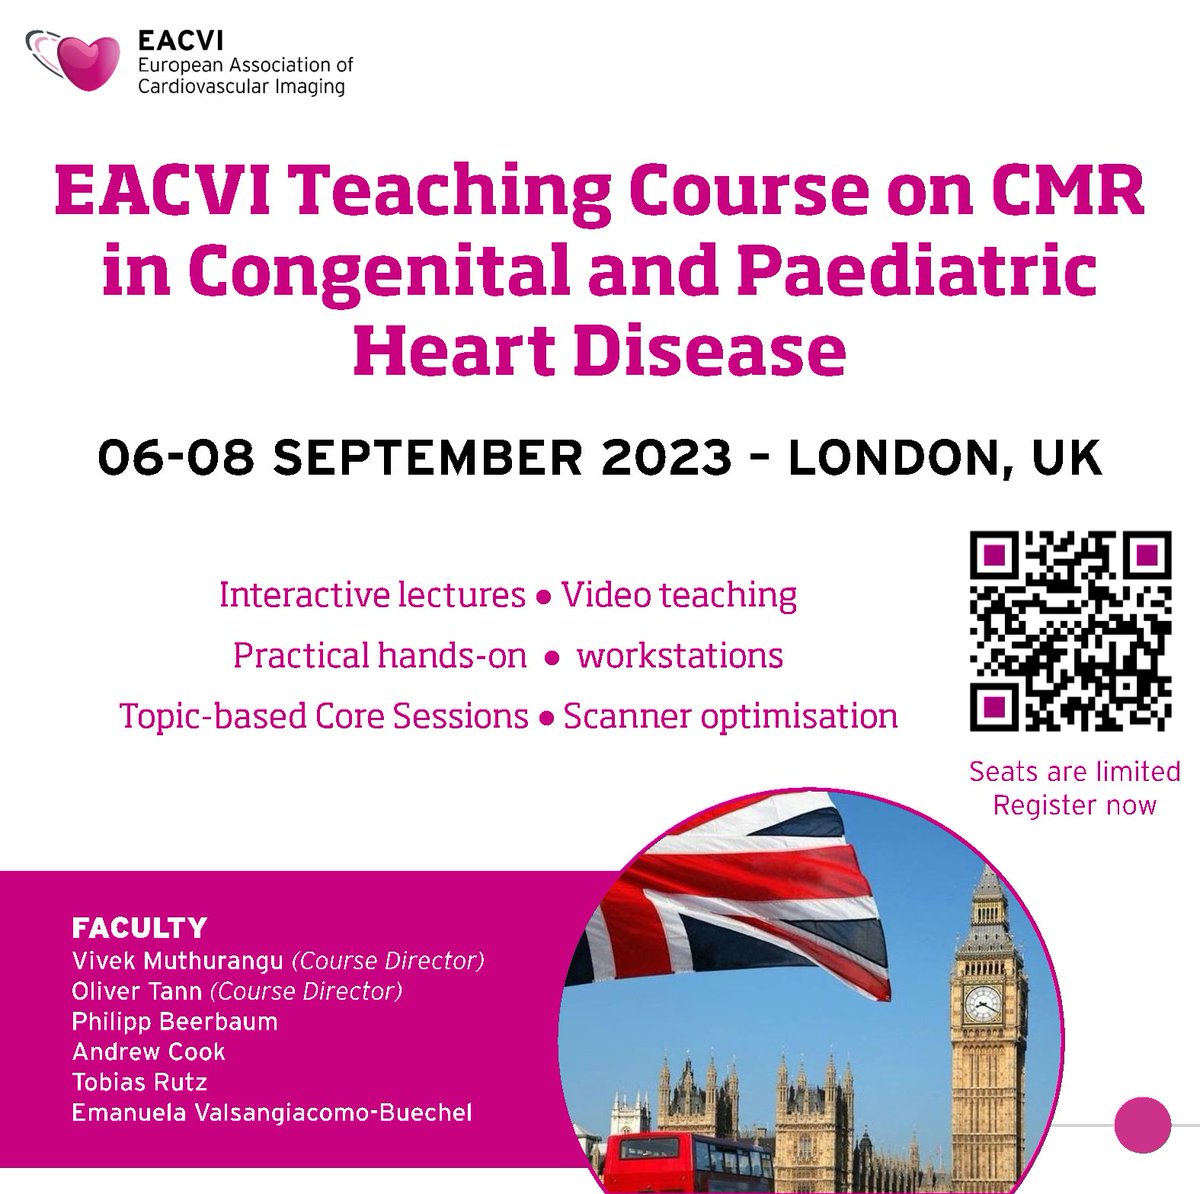 If you are passionate about cardiac imaging. If you work with cardiac MRI. If you love GUCH or are a pediatric cardiologist. Don't even think of missing this! Visit the link for info and registration in thread @EACVIPresident @PezelT @meucci_chiara @denisamuraru @VLSorrellImages